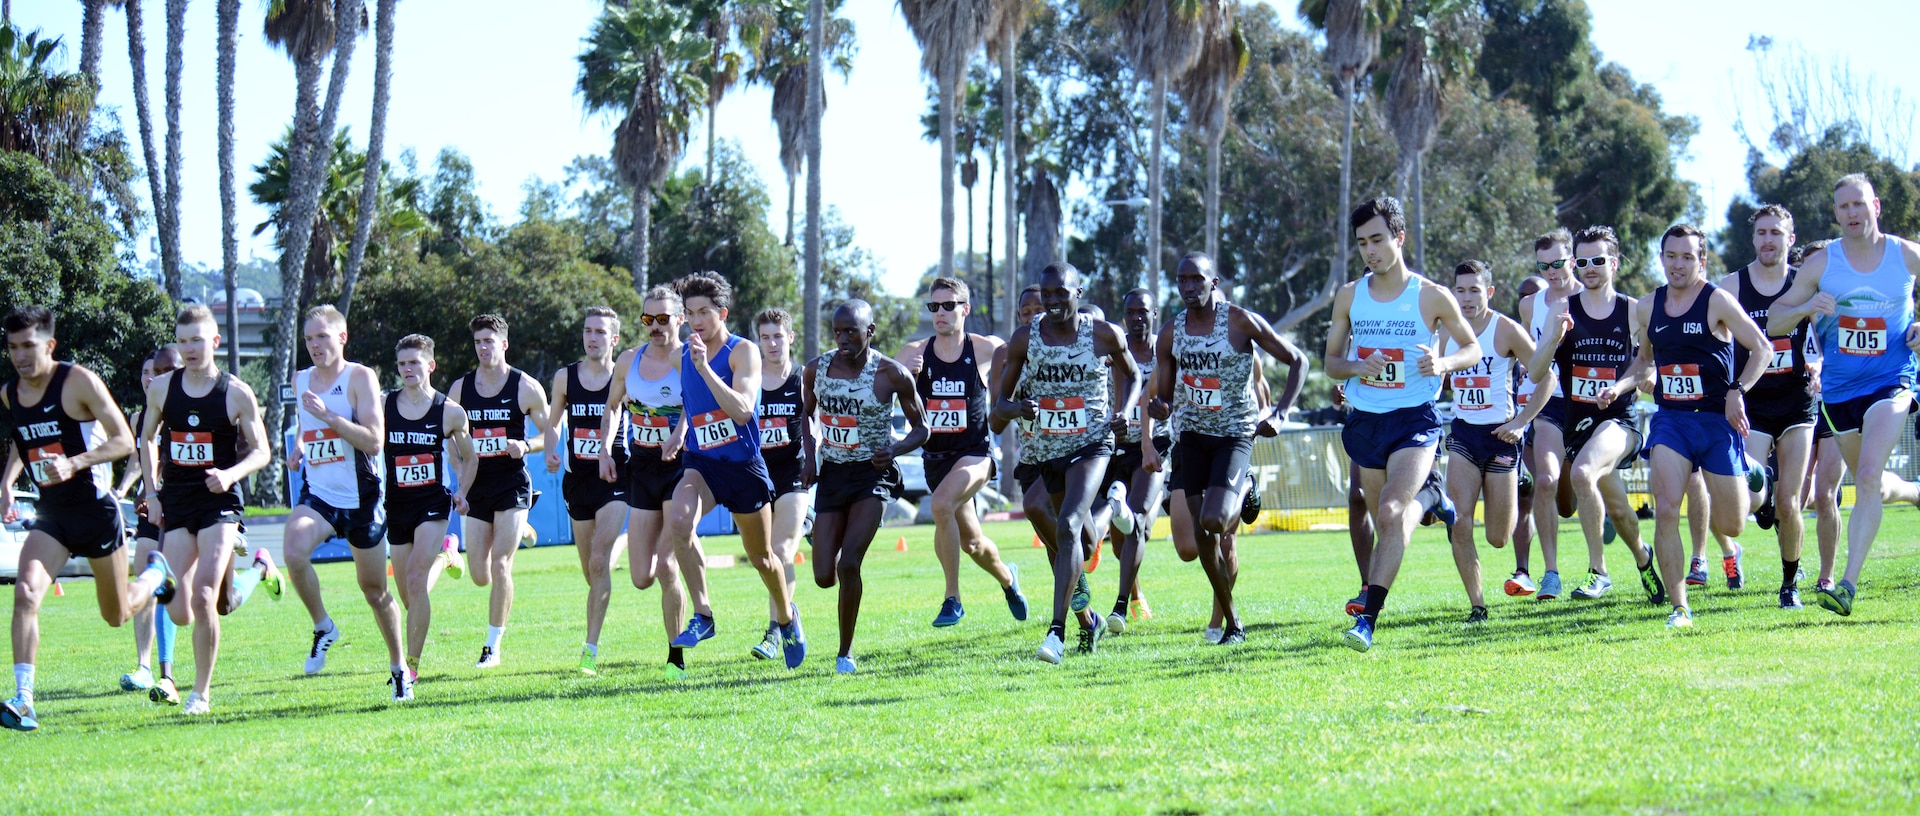 Runners begin the Armed Forces Cross Country Championship, run in conjunction with the USA Track and Field senior men 10K race at Mission Bay Park in San Diego, Jan. 18, 2019.